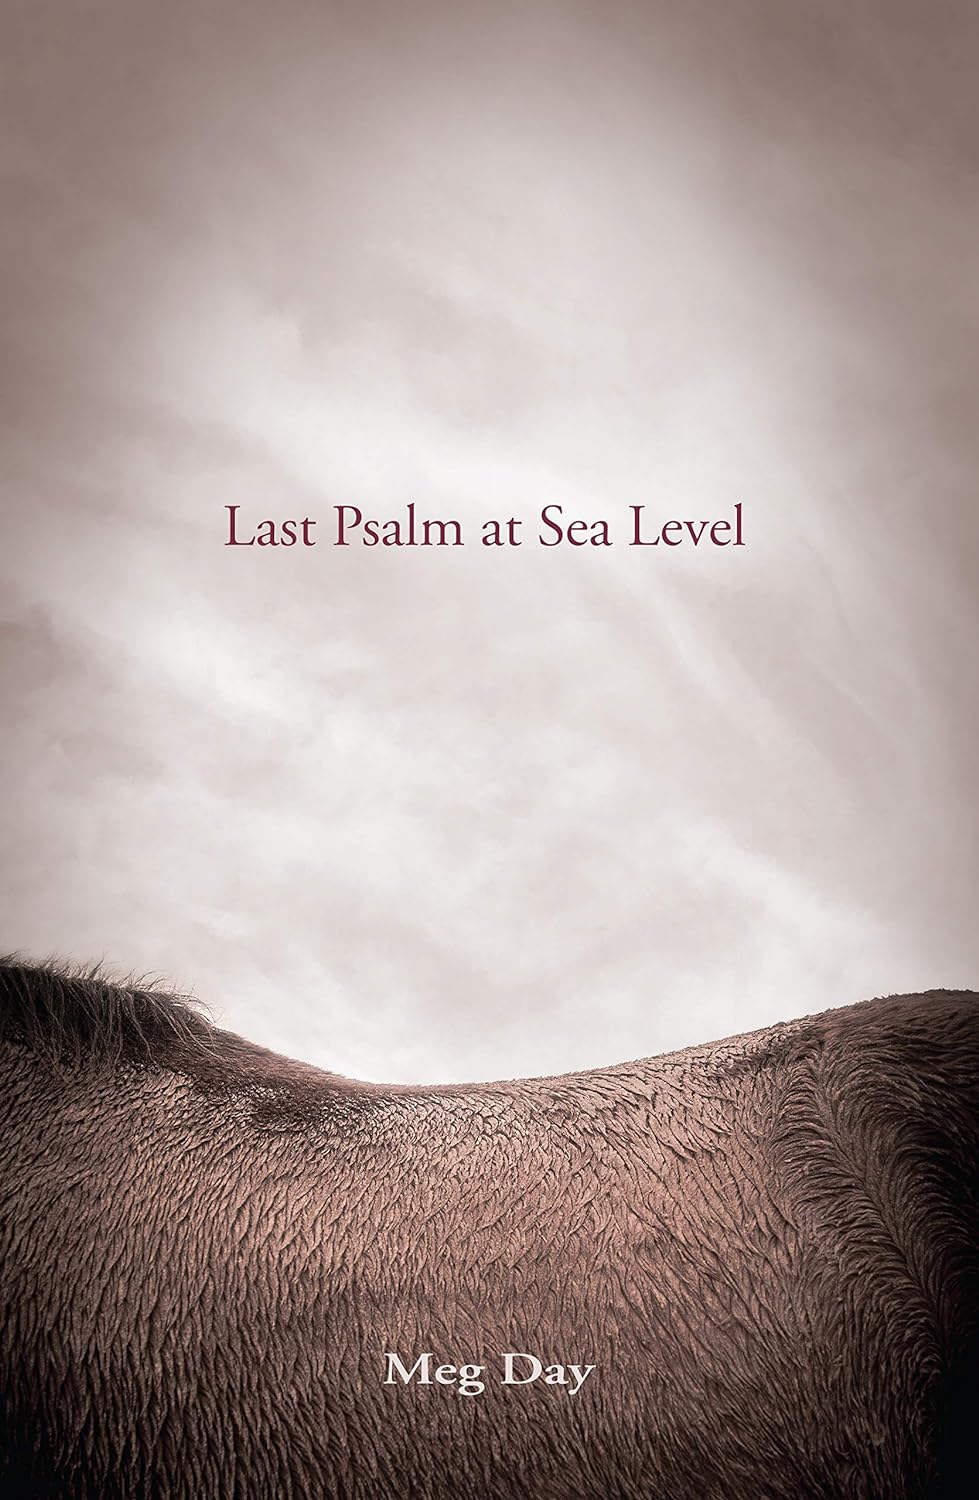 Last Psalm at Sea Level by Meg Day